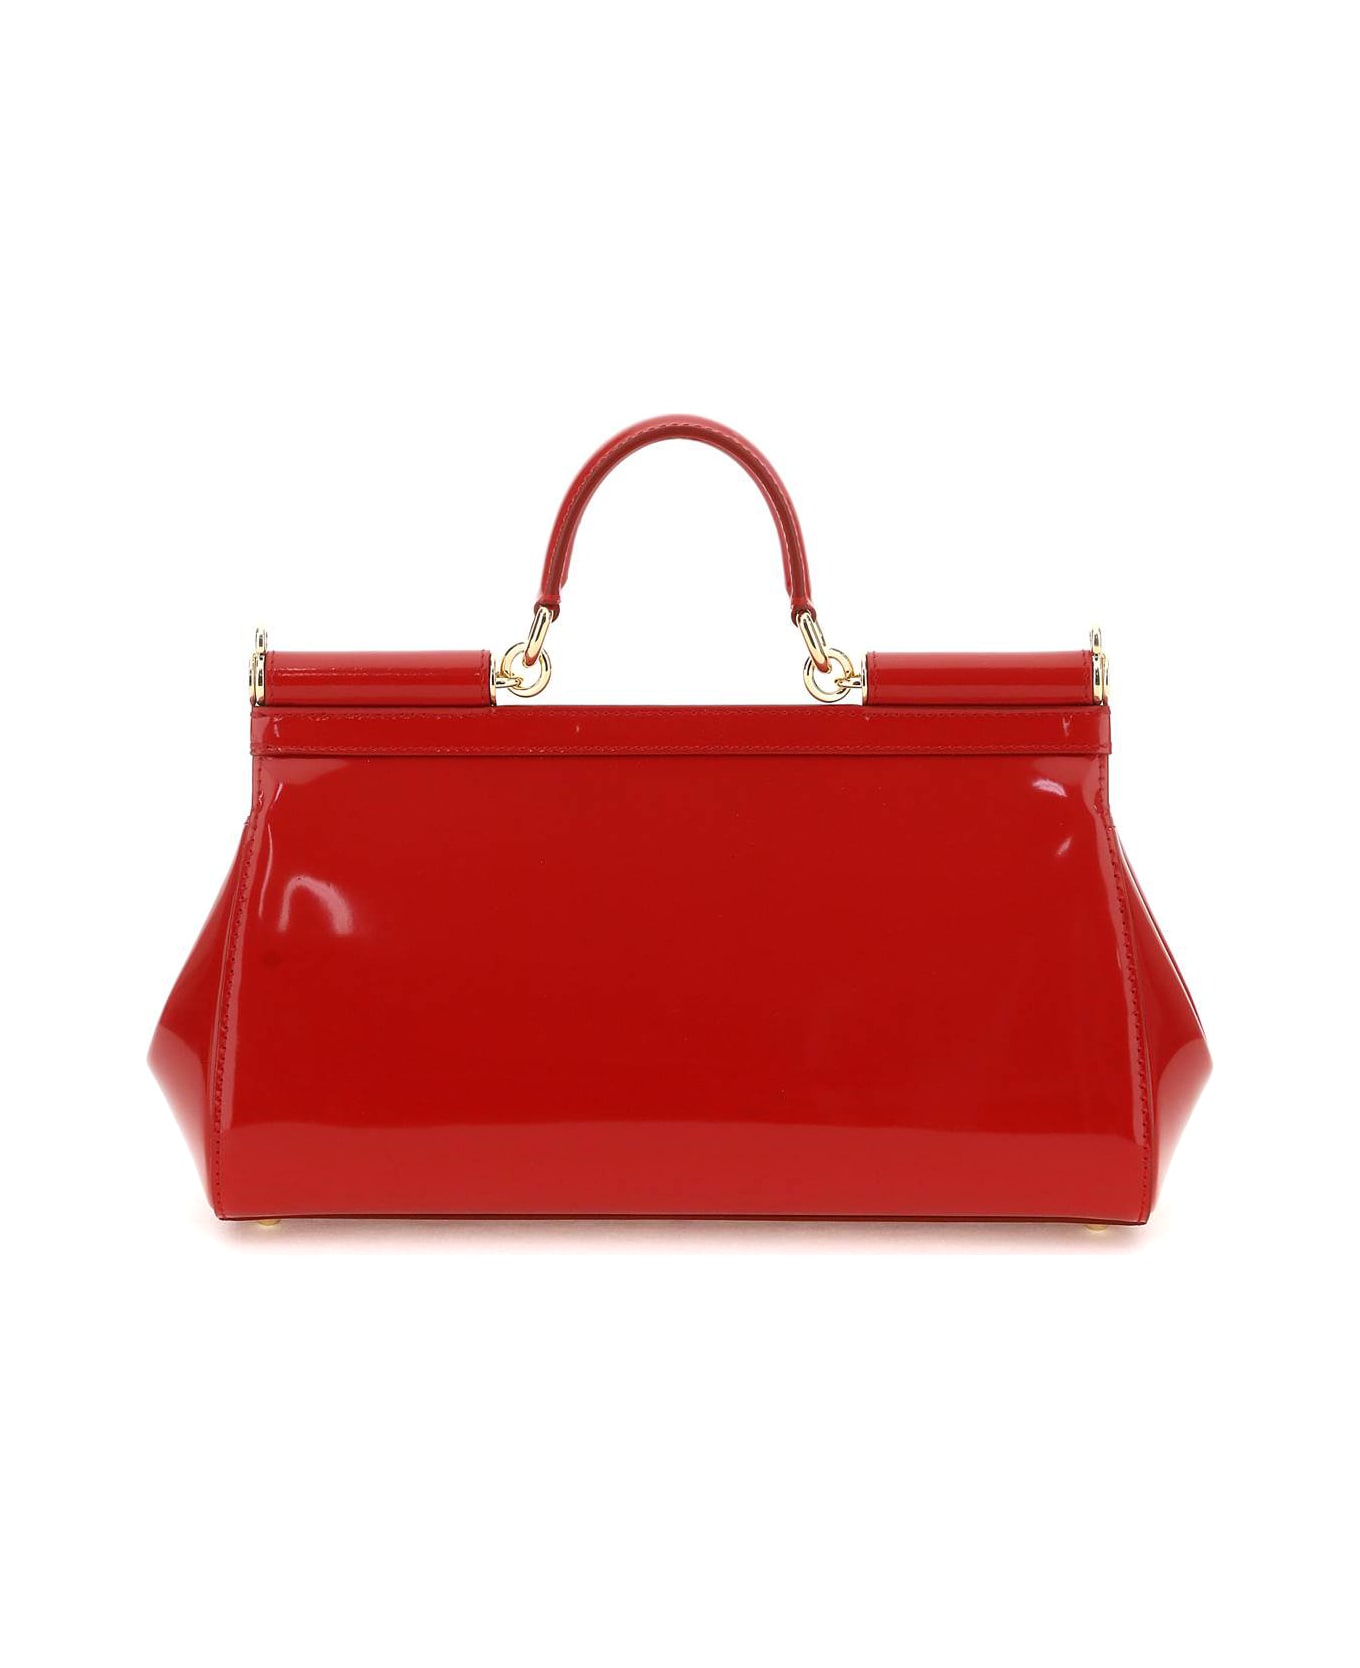 Dolce & Gabbana Patent Leather Medium New Sicily Bag - ROSSO (Red)